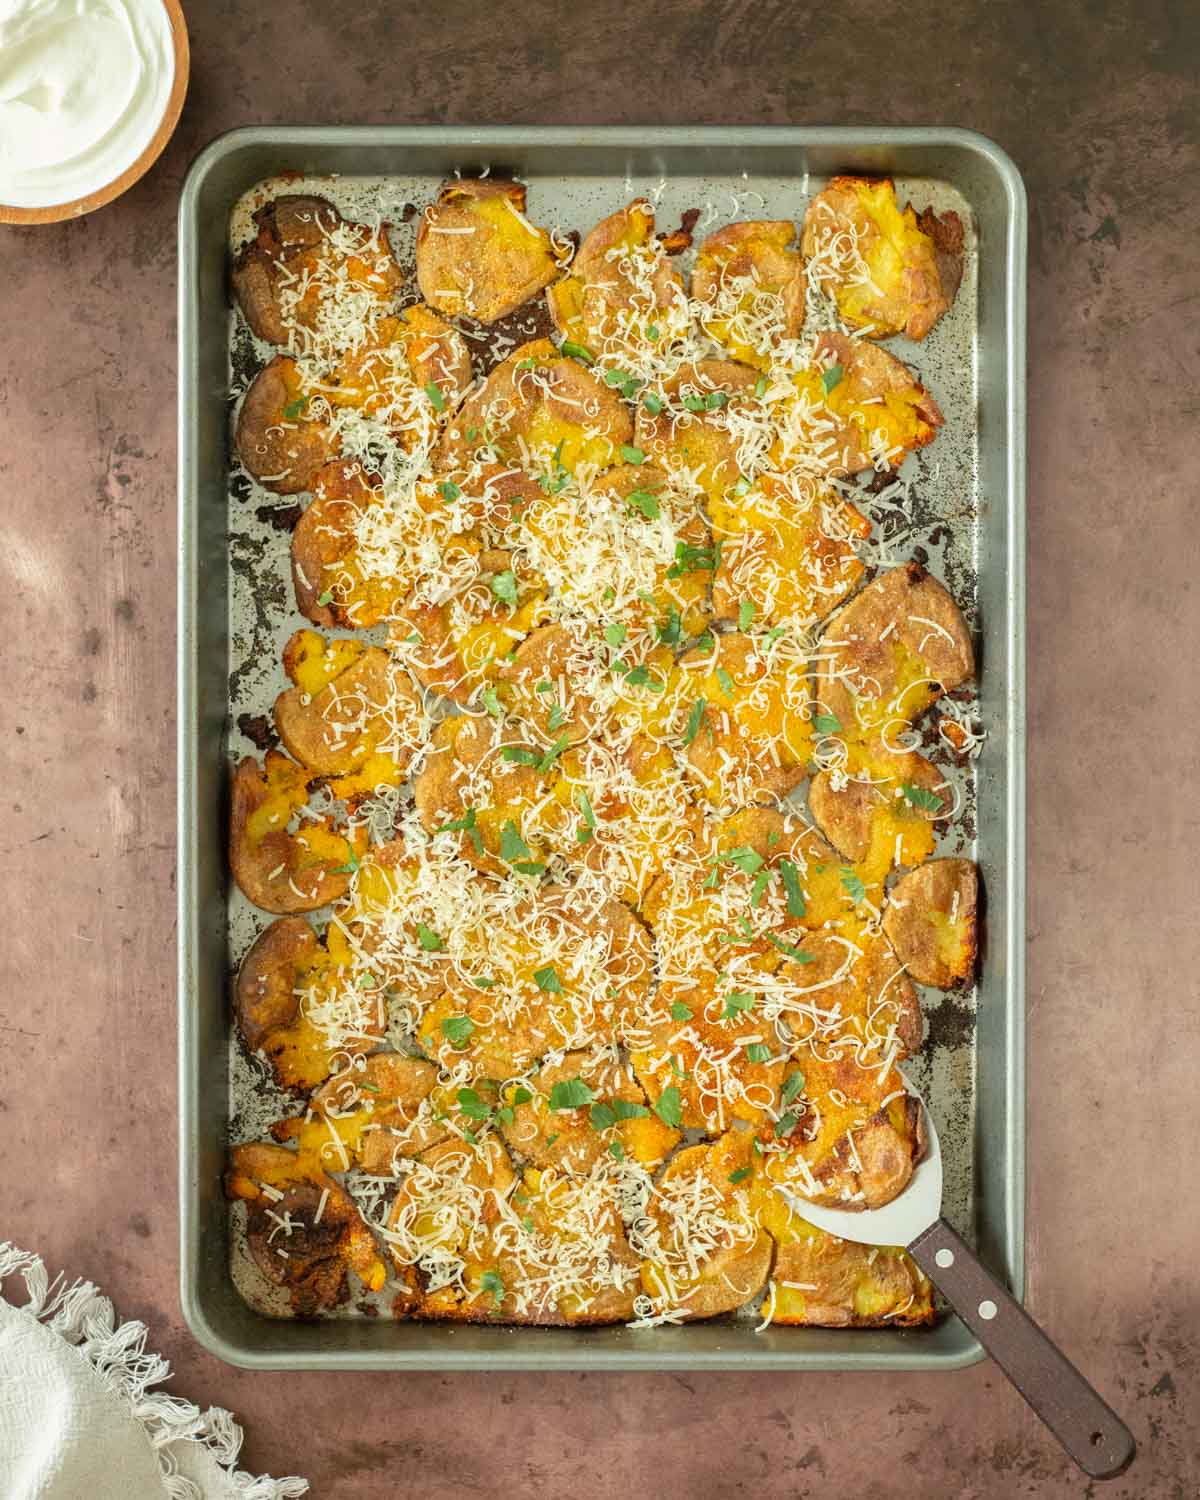 These garlic parmesan smashed potatoes are an easy and flavorful side dish perfect for a weeknight meal, holiday dinner, or as an appetizer. This smashed potato recipe makes crispy potatoes topped with simple spices for flavor and served with freshly grated parmesan cheese.